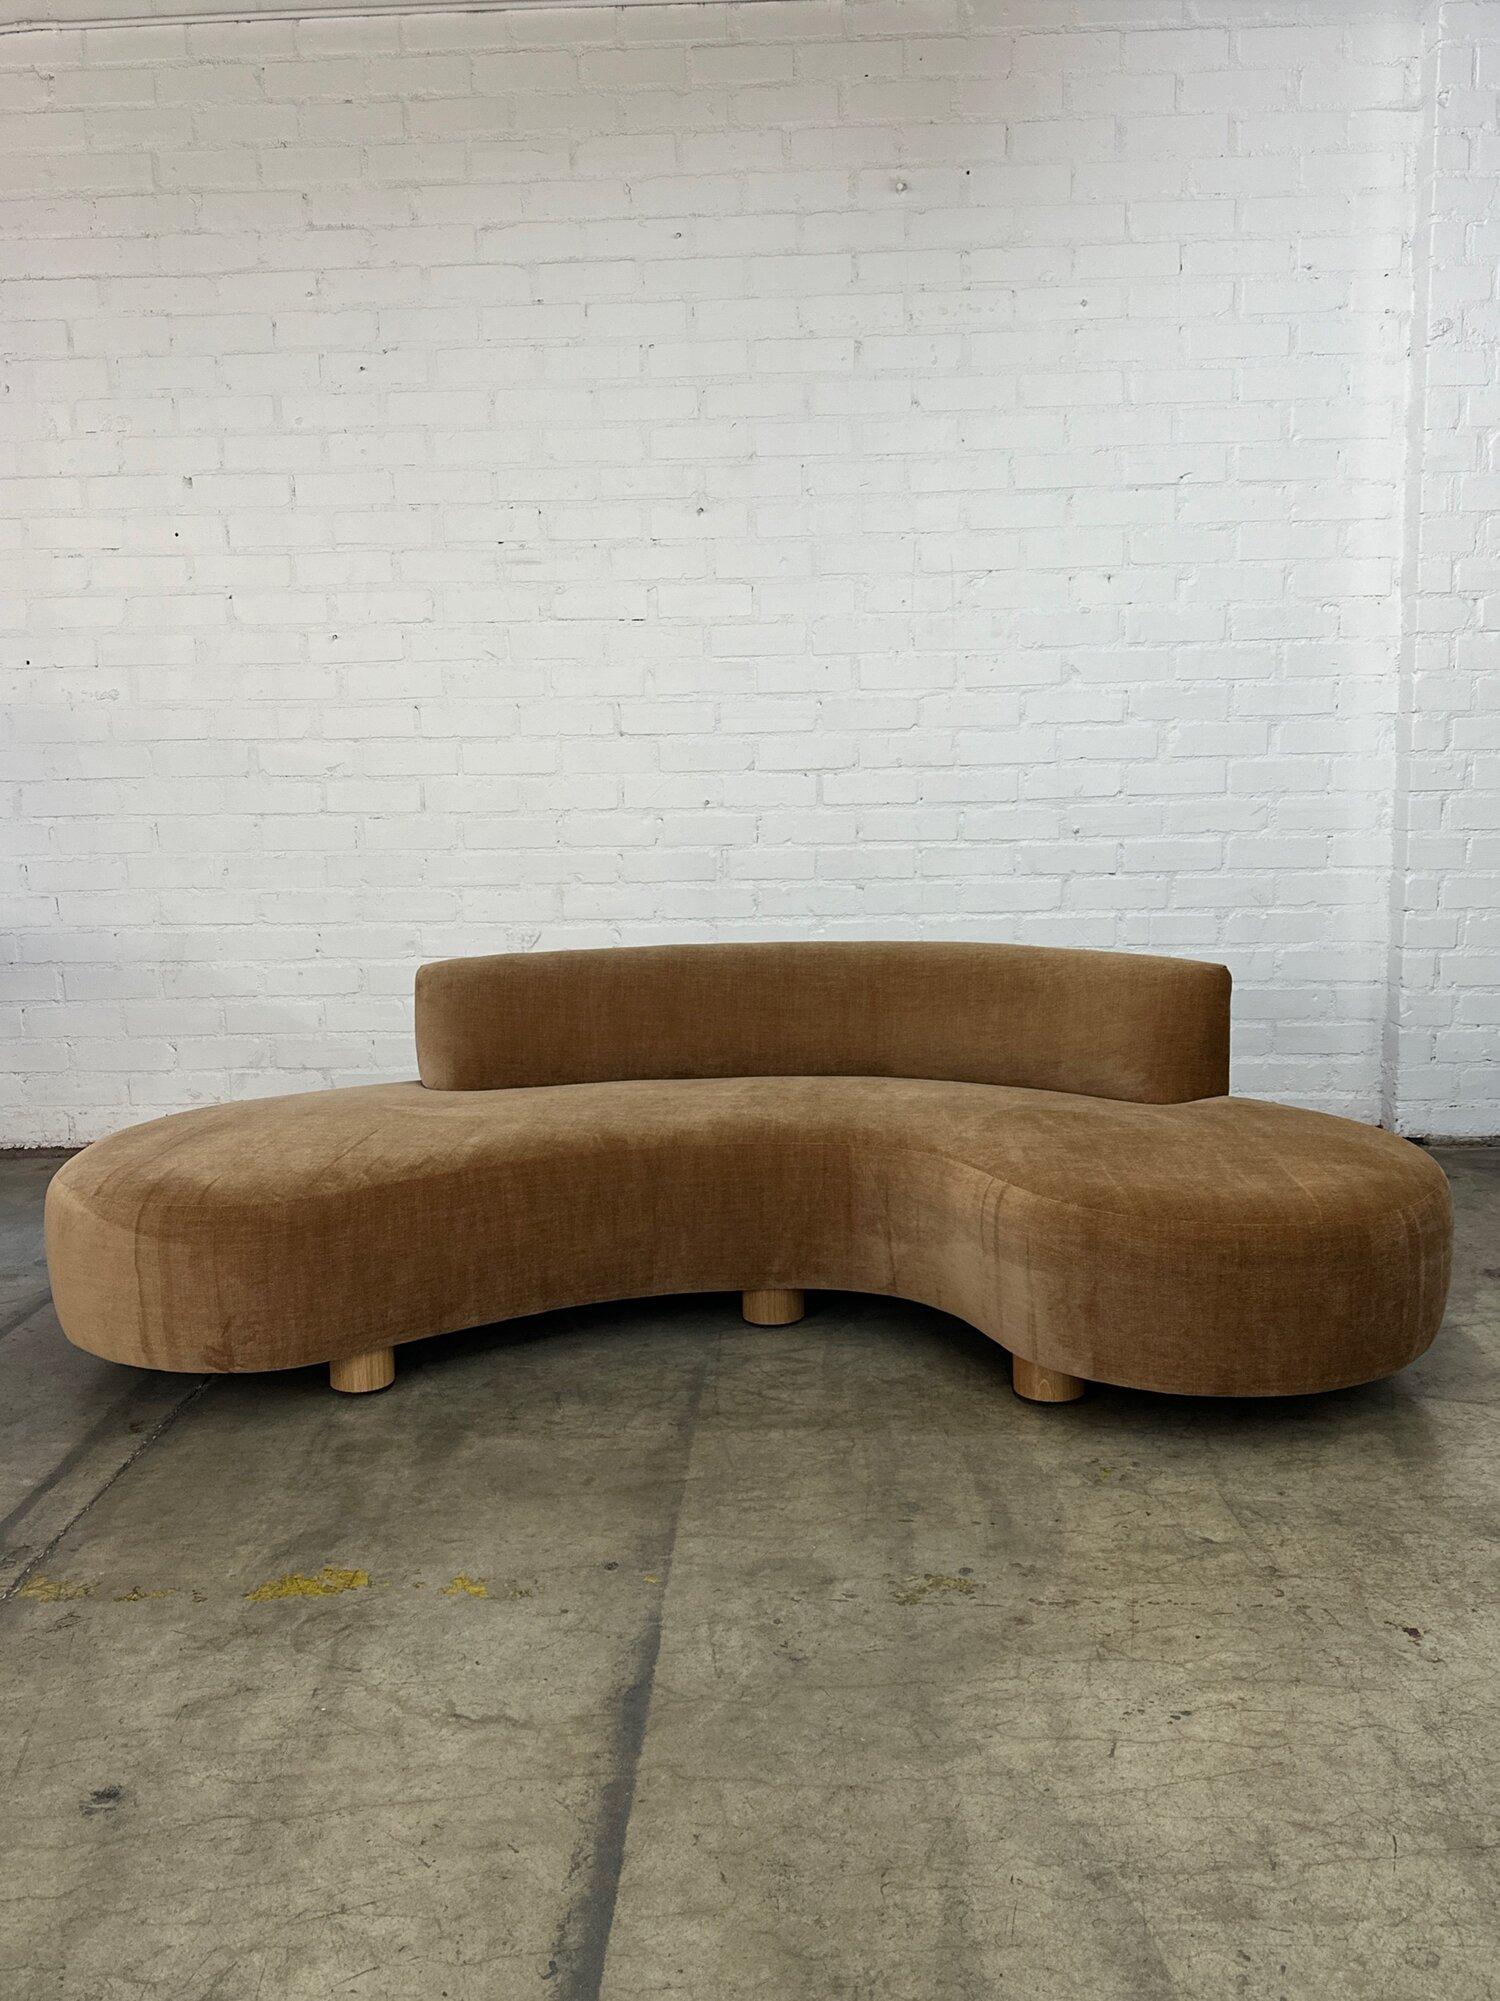 W100 D37 H25 SW100 SD33 SH16

Handcrafted Wave sofa by Vintage on Point on white oak cylinder legs. Upholstered in Cognac colored chenille.